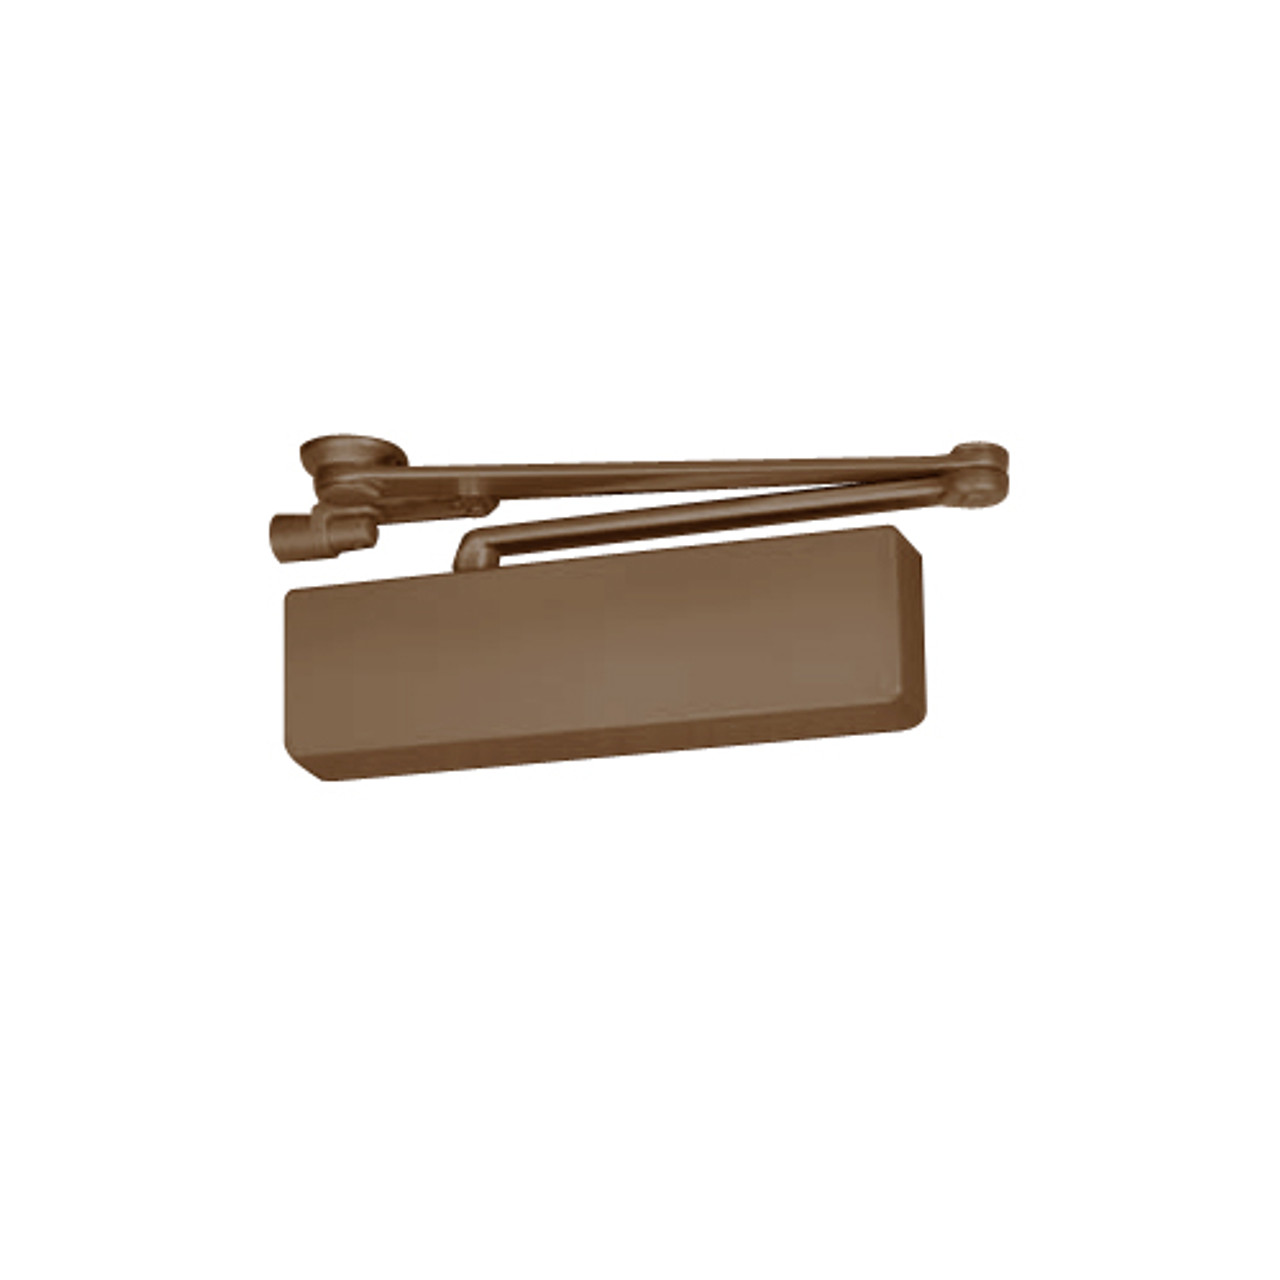 CPS7570TDA-691-LH Norton 7570 Series Security Door CloserPlus Spring Arm with Thumbturn Hold Open in Dull Bronze Finish